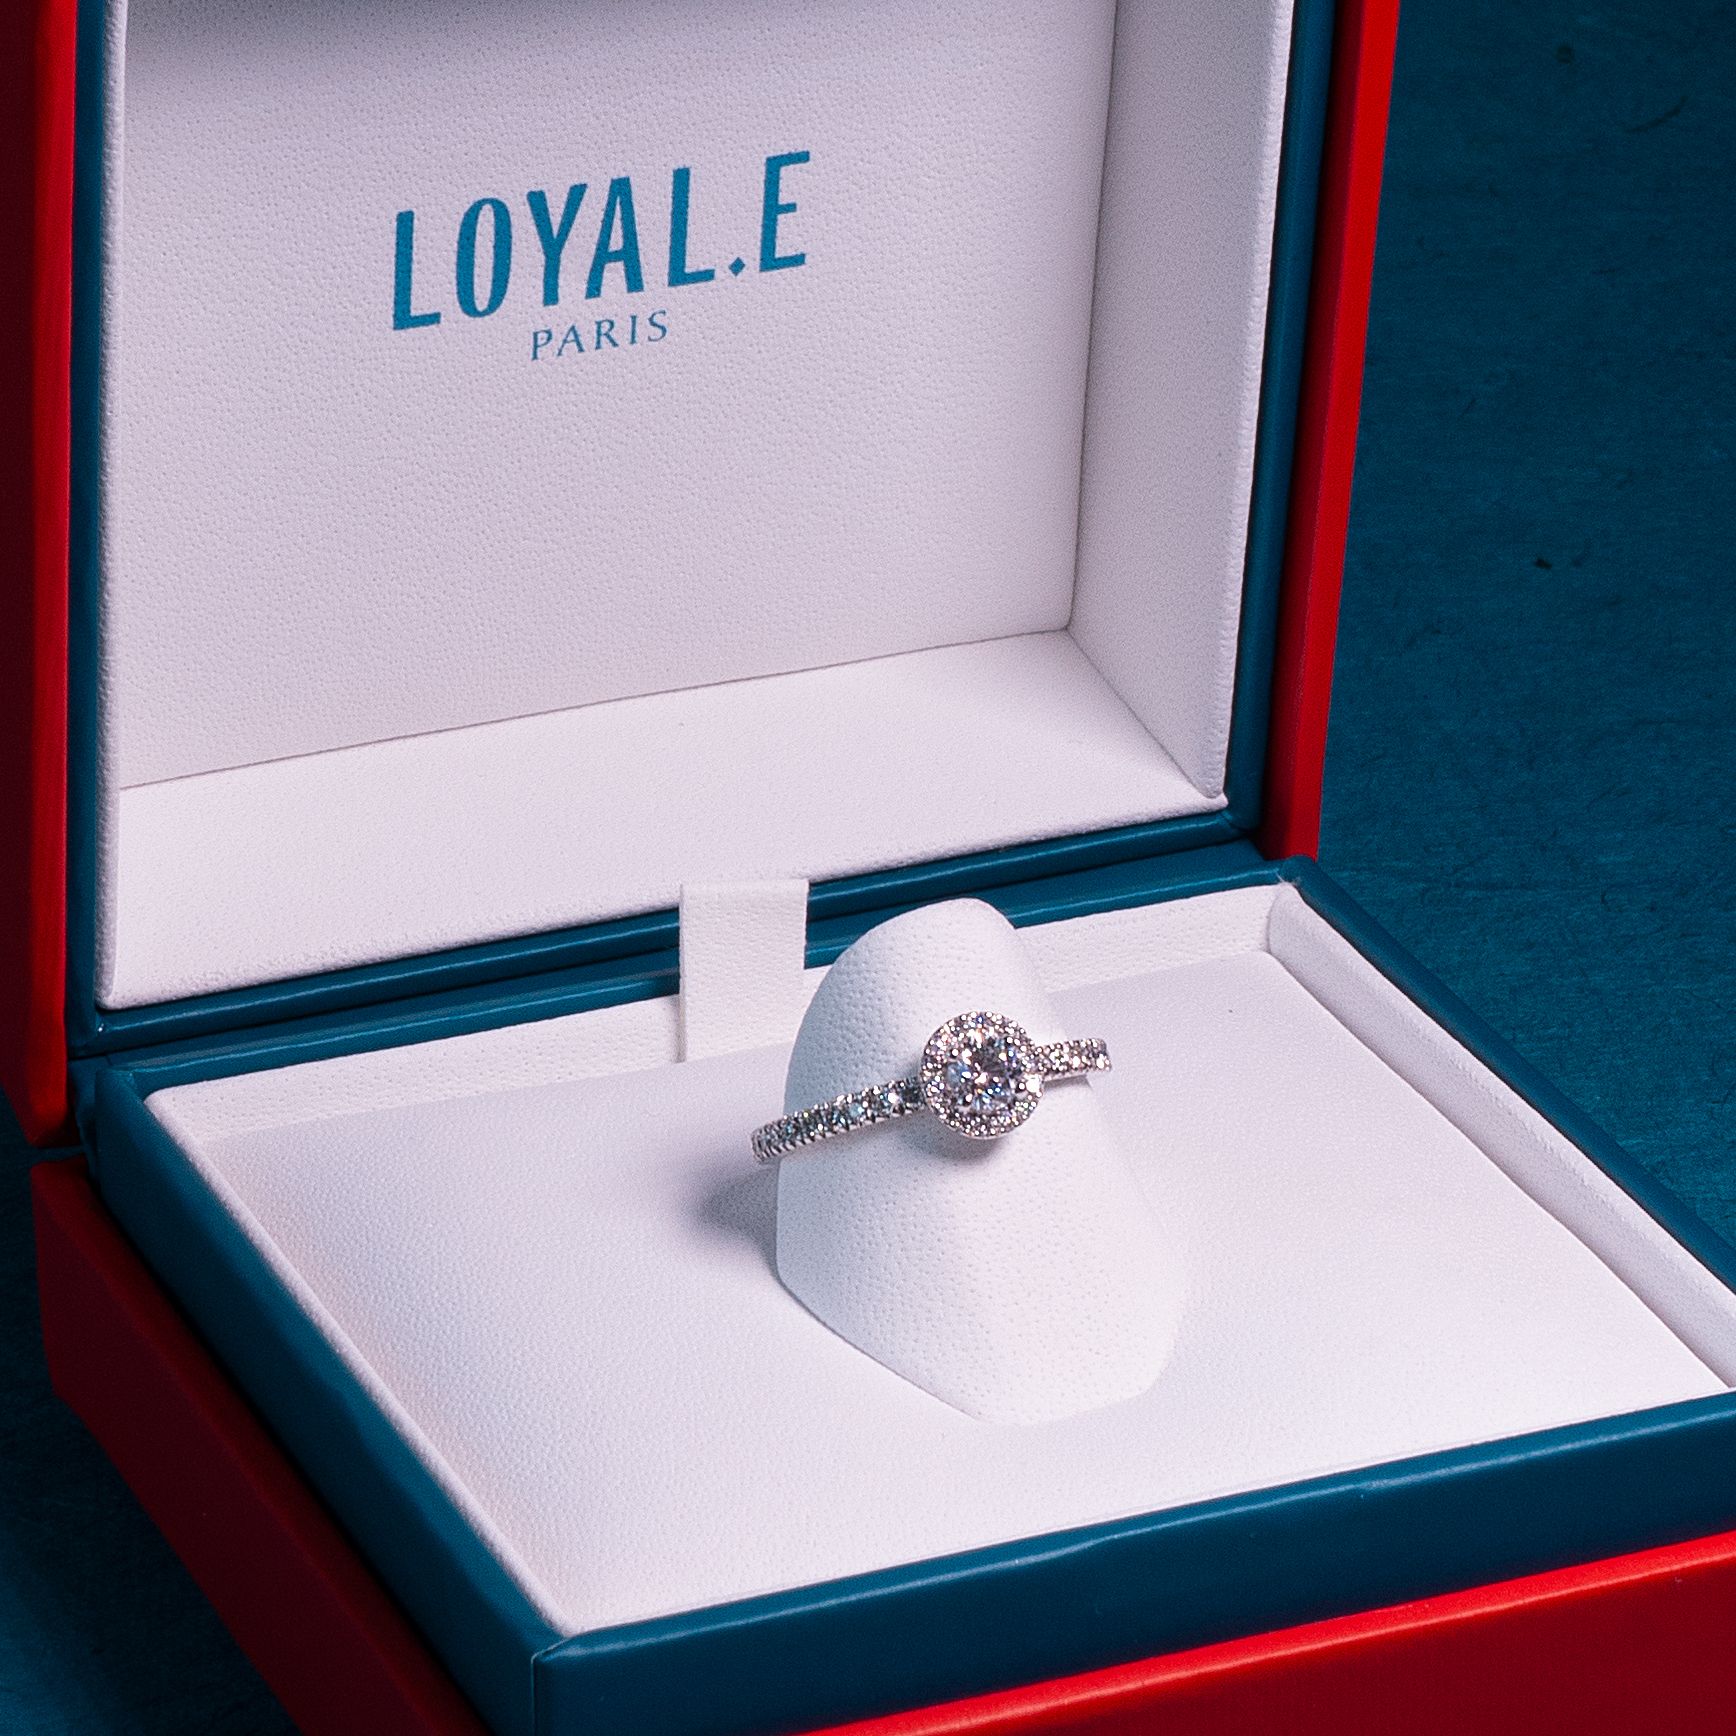 Loyale Paris Engagement ring wedding band lab grown diamonds recycled gold jewelry ethical made in france bridal packaging jewelry box